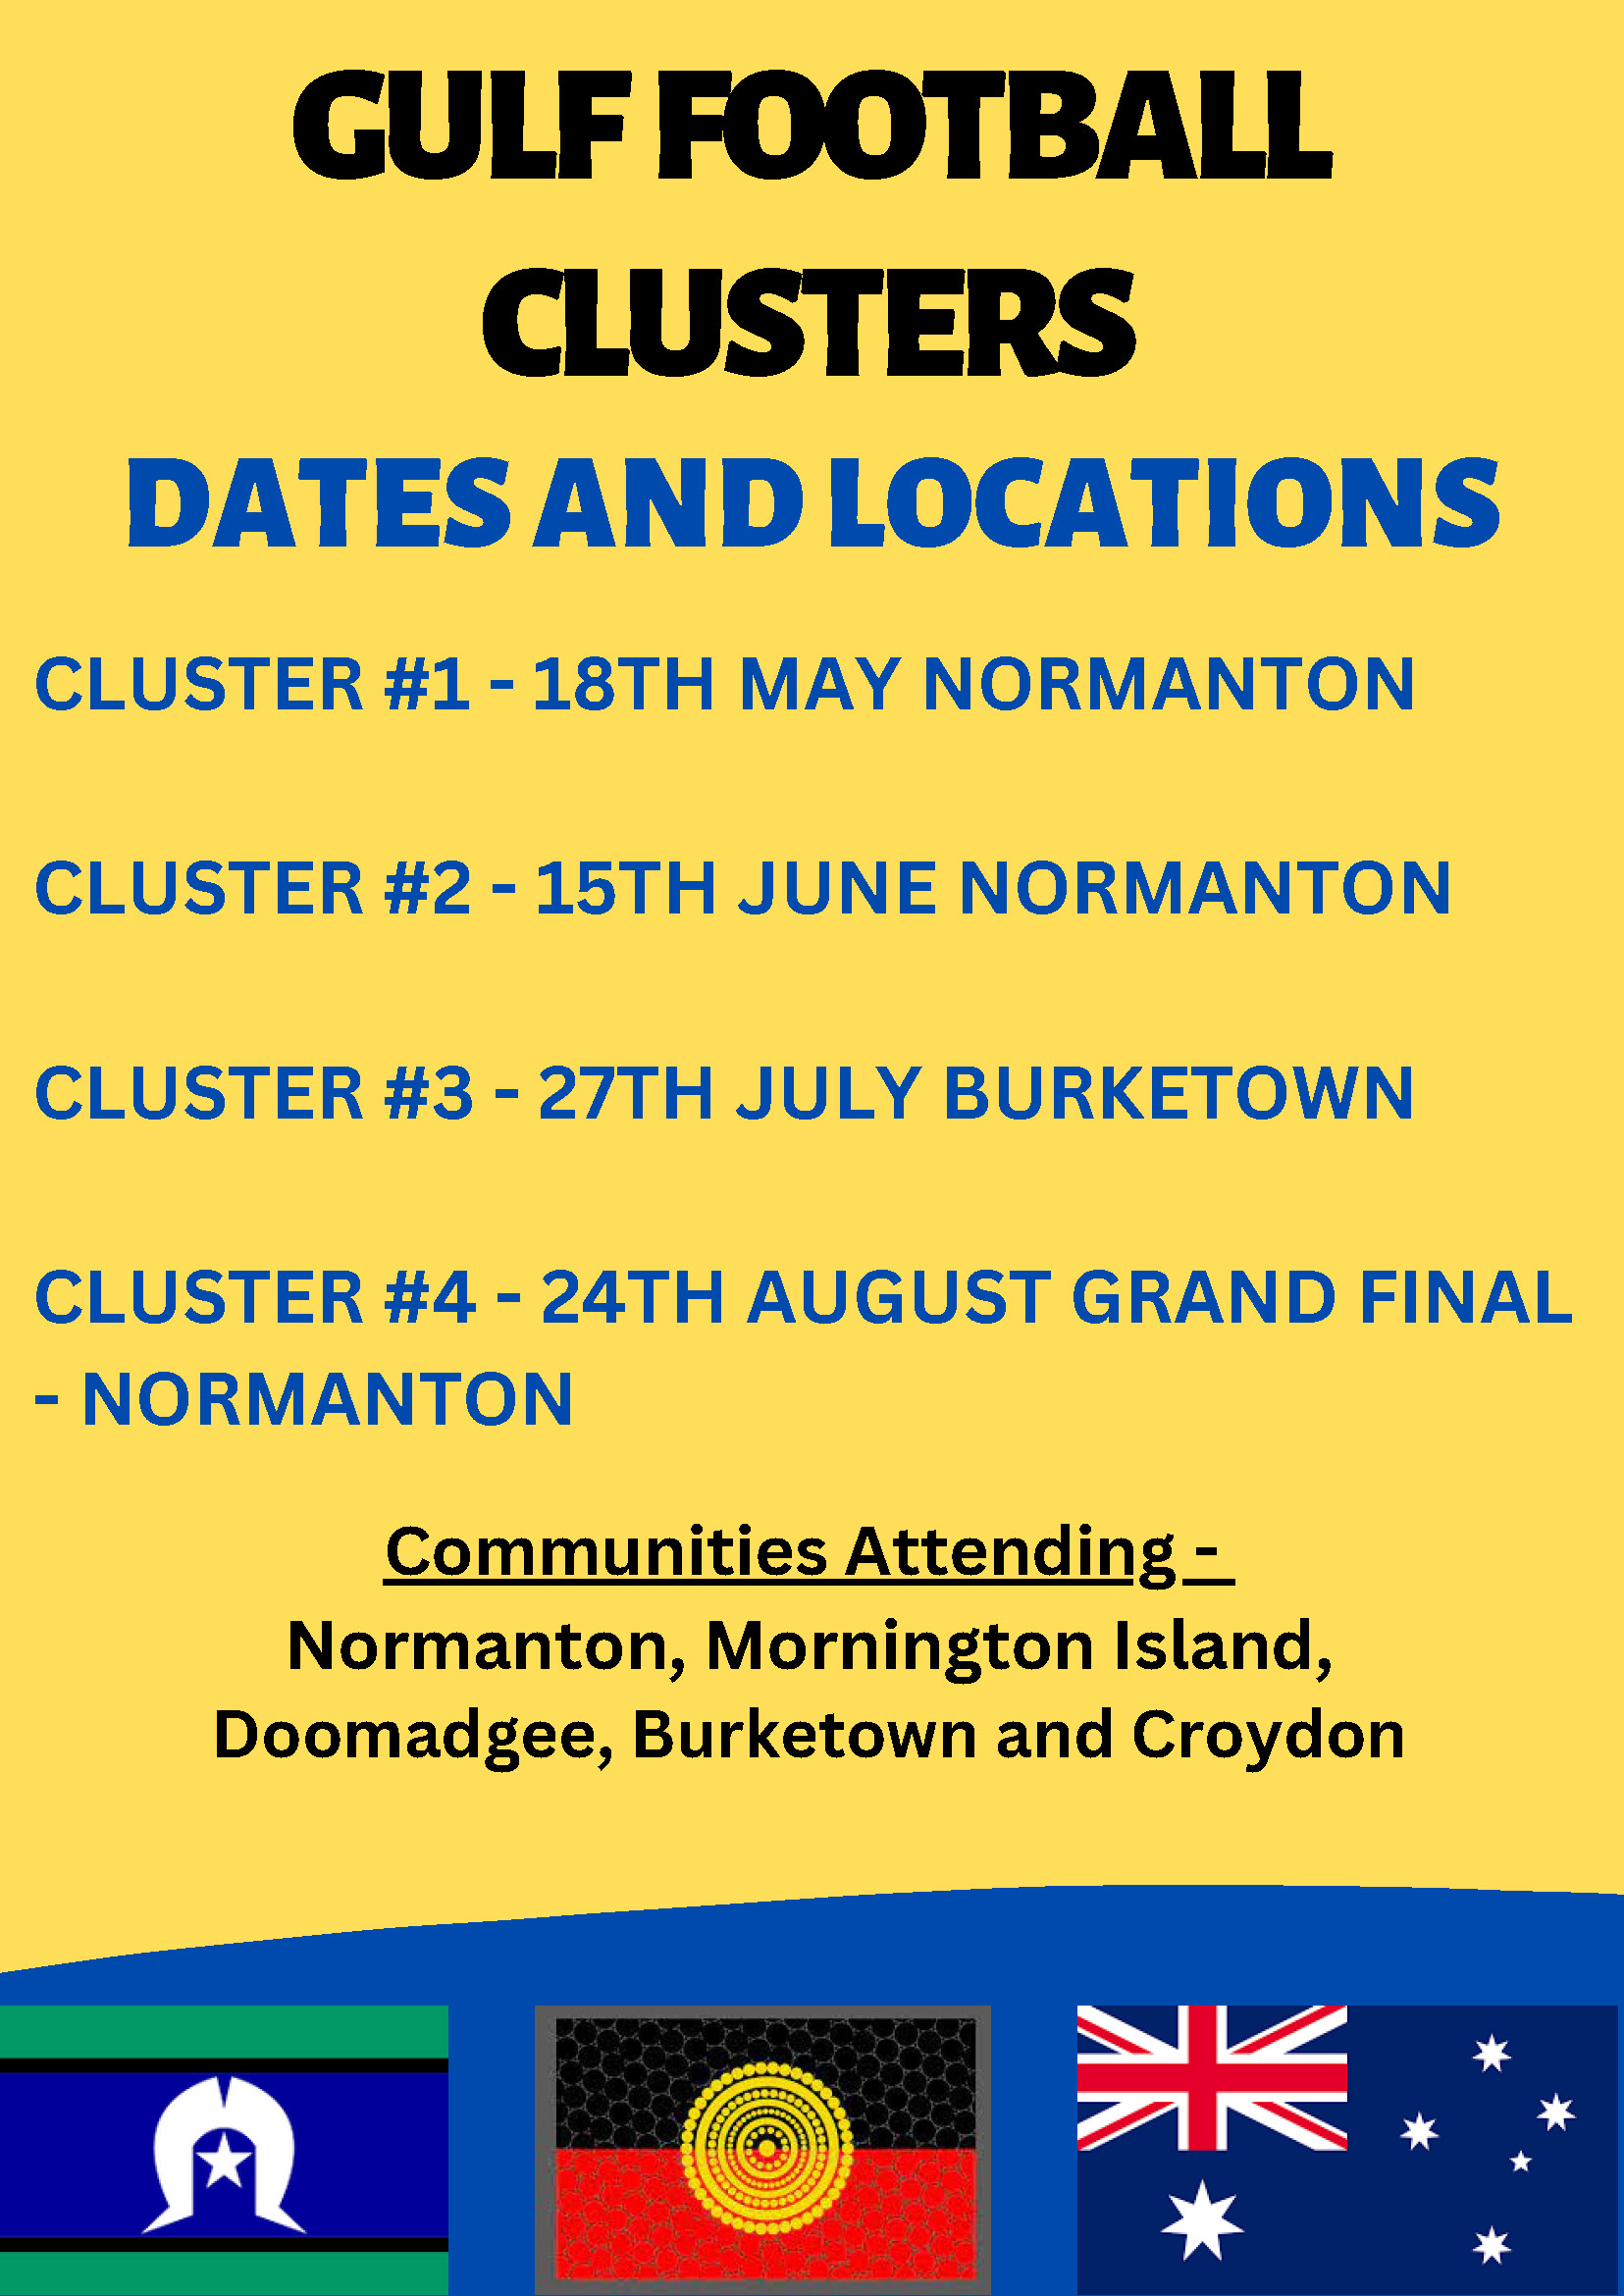 Football Cluster Dates